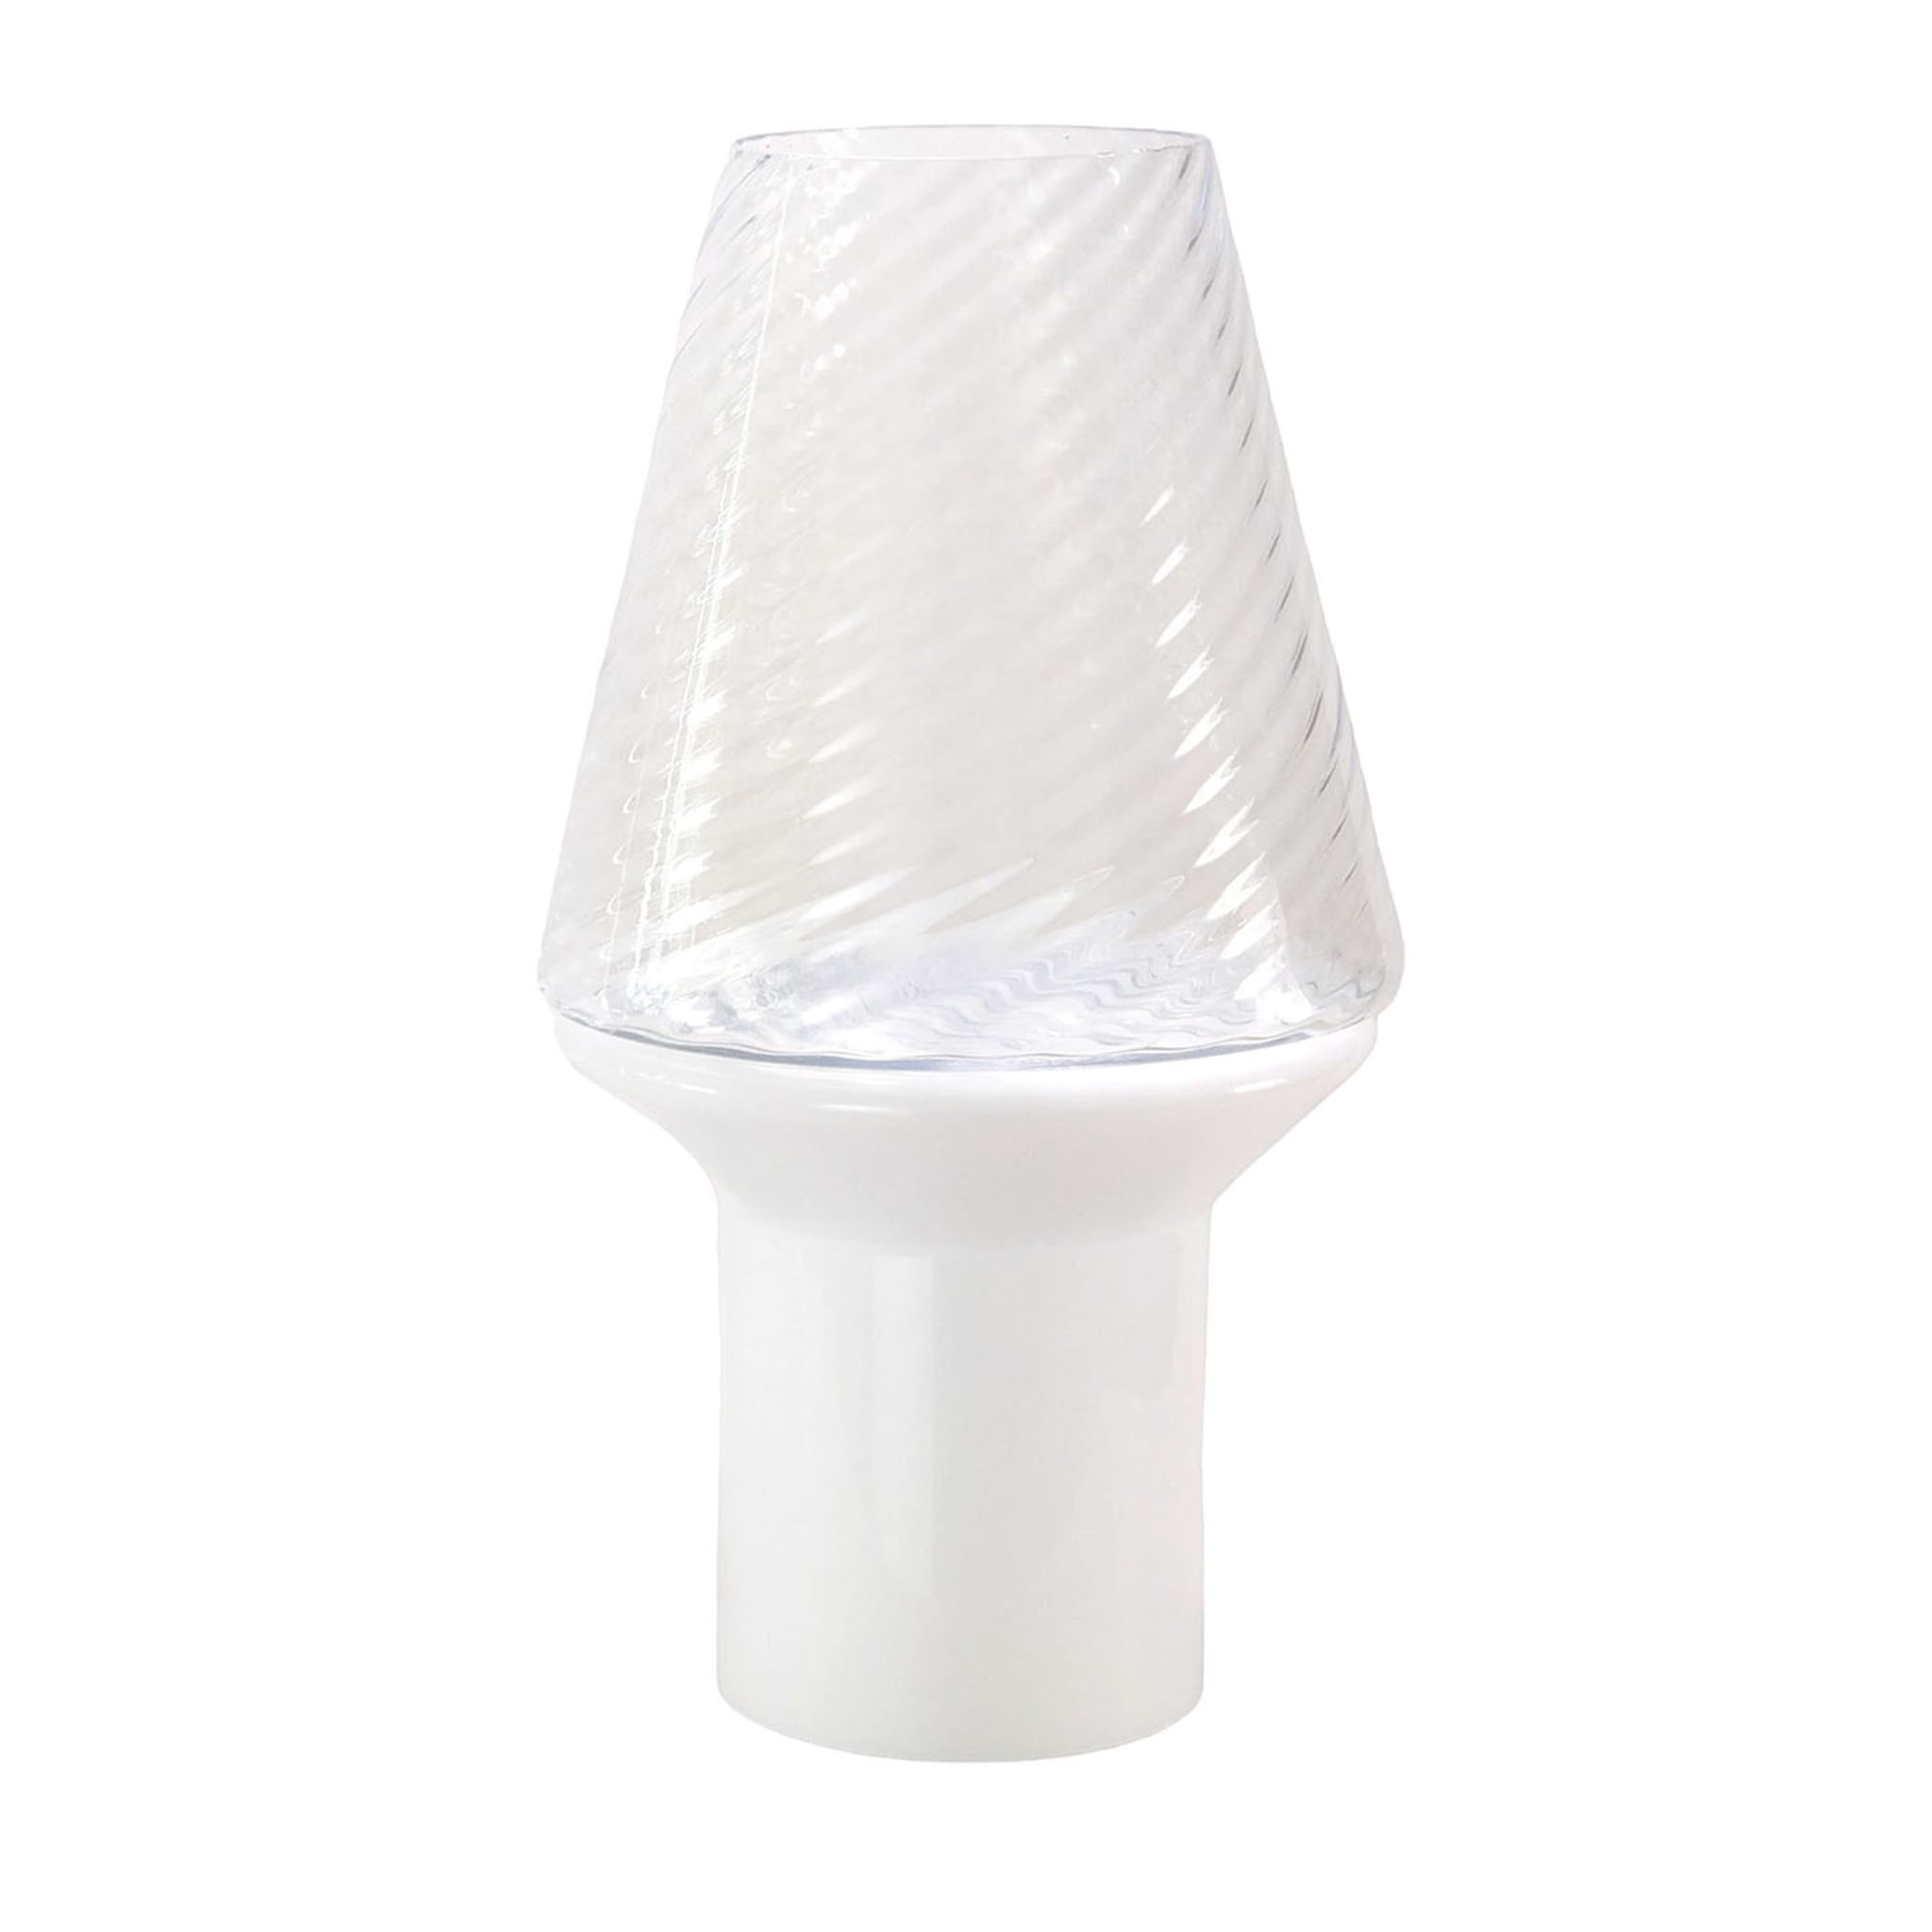 Forest White Table Lamp by Romani Saccani #1 - Main view